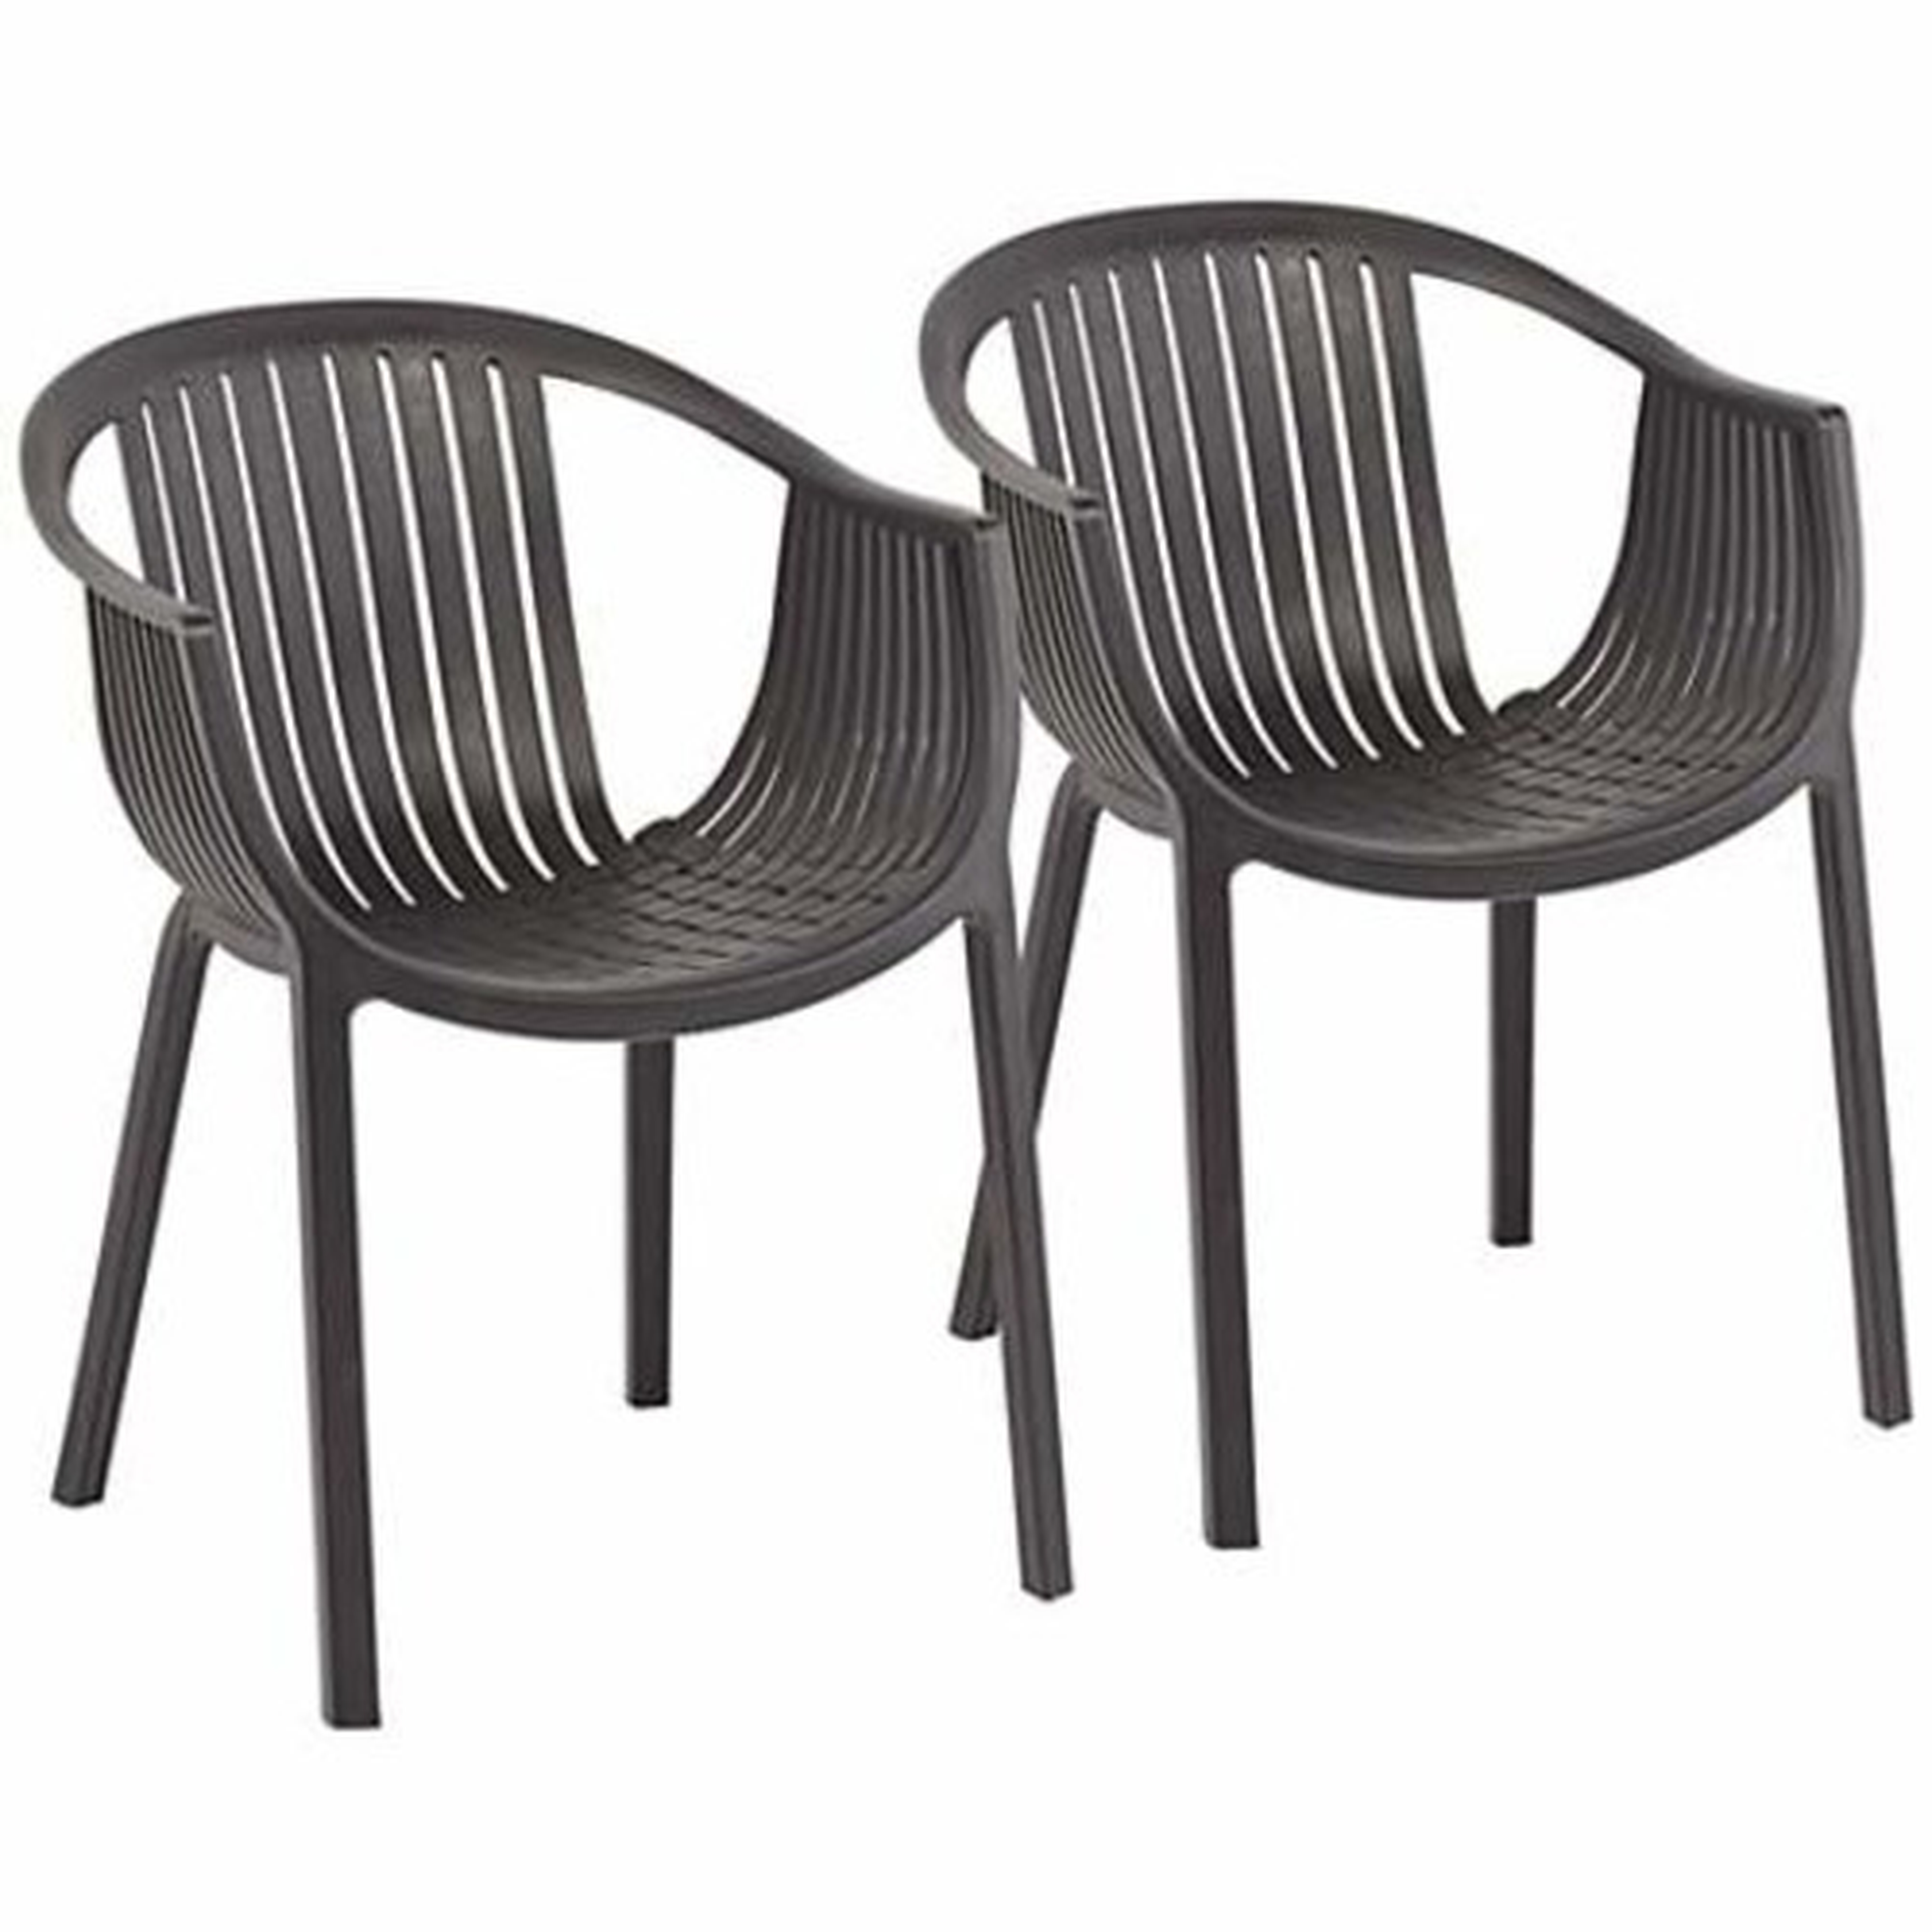 Delray Bay Black Outdoor Accent Chairs Set of 2 - Lamps Plus